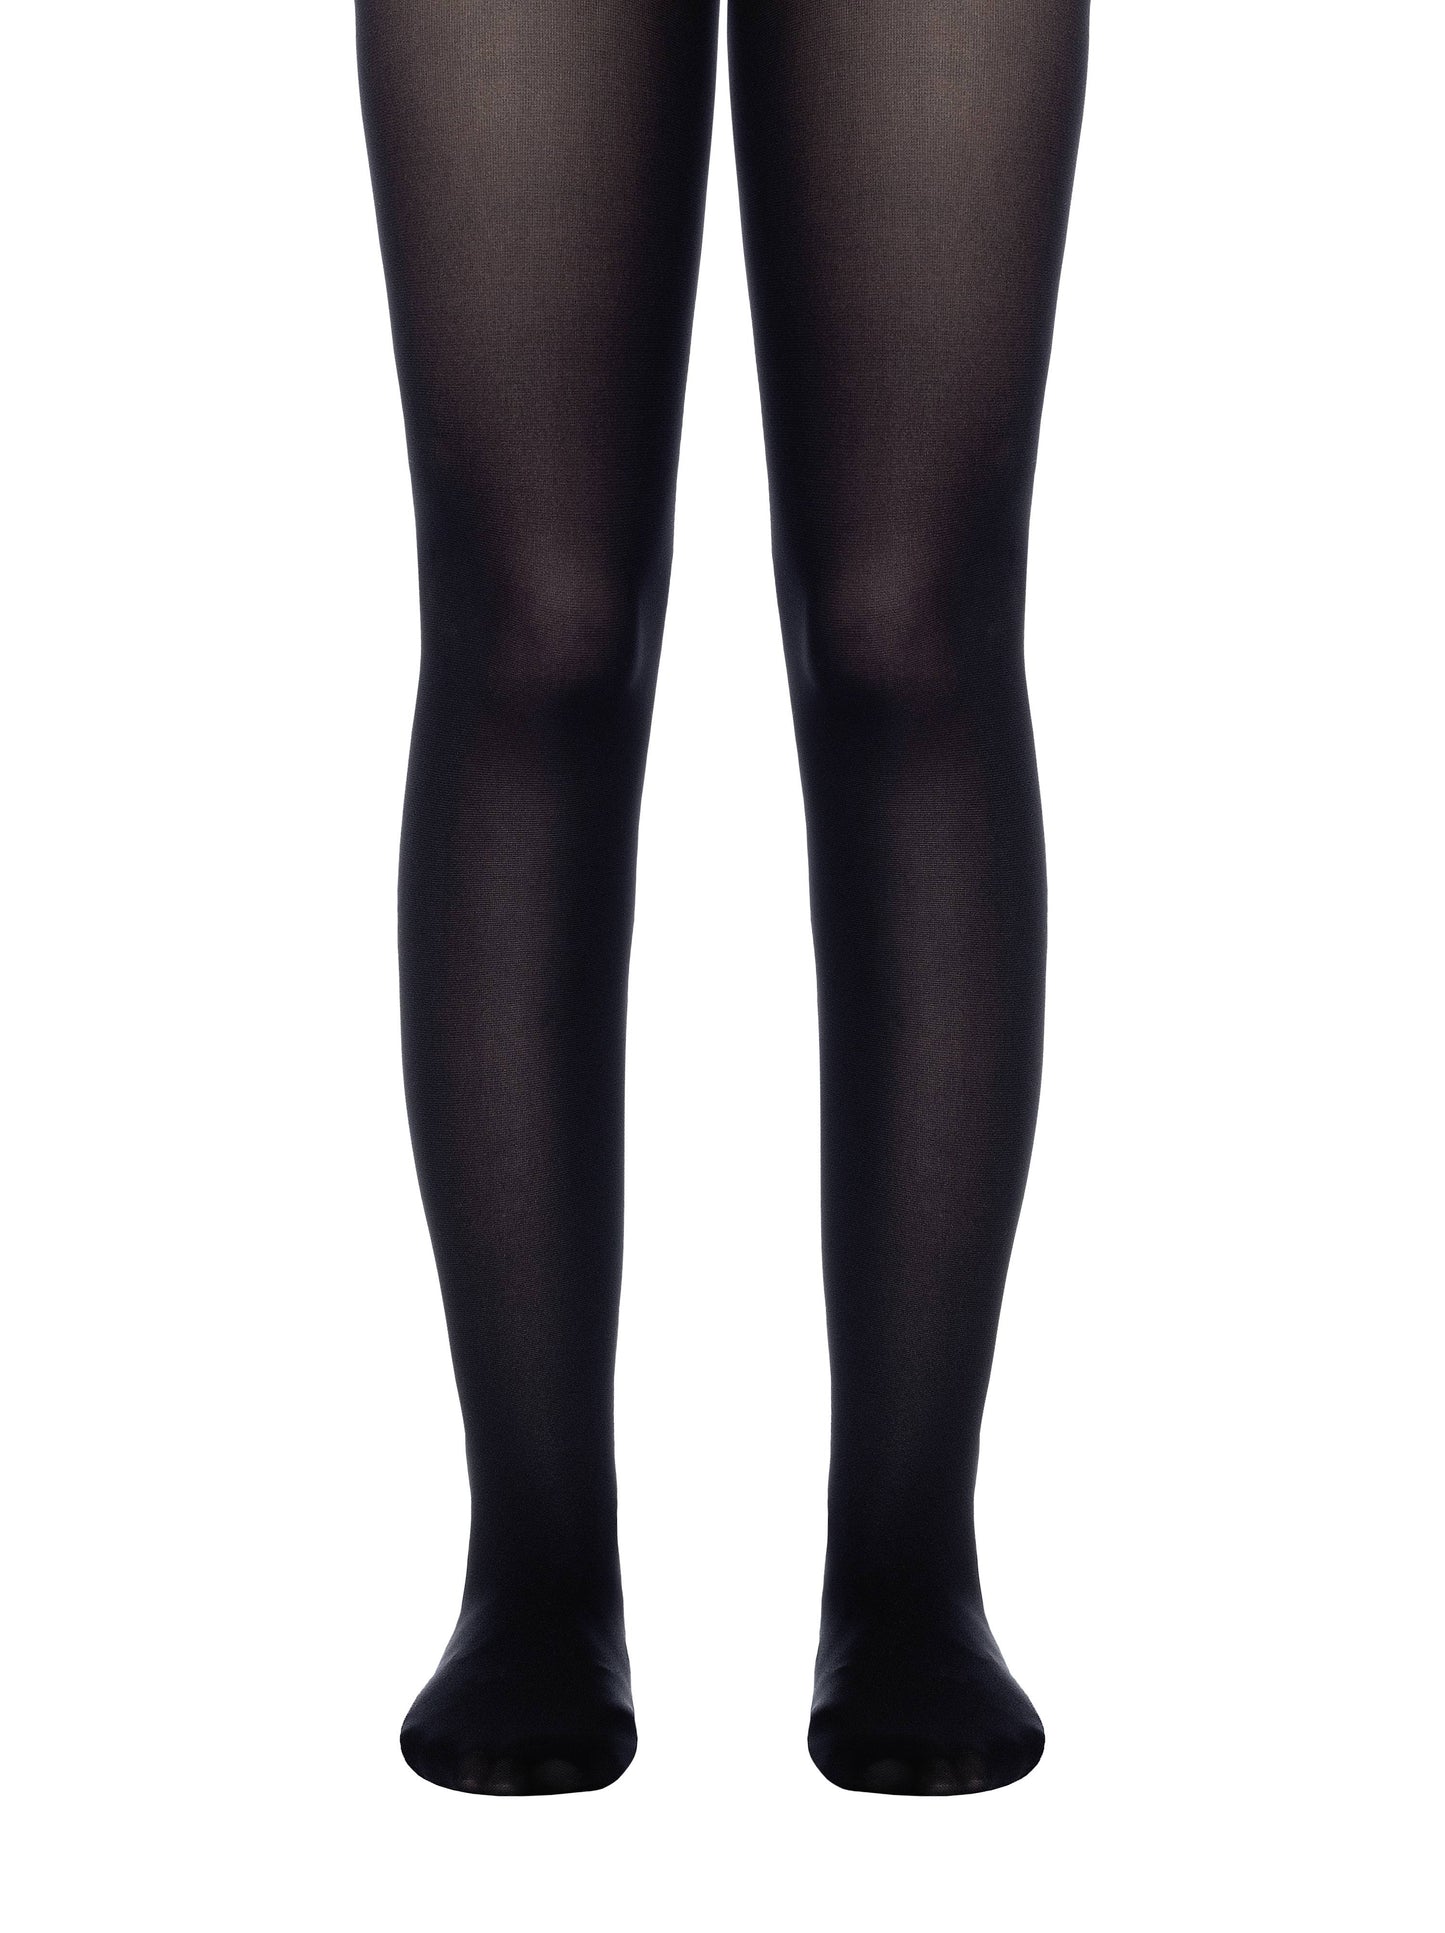 Conte Only Teens 40 Den - Fantasy Semi-Opaque Classic Tights For Girls/Teens - 14yr. 16yr. (12С-46СП)